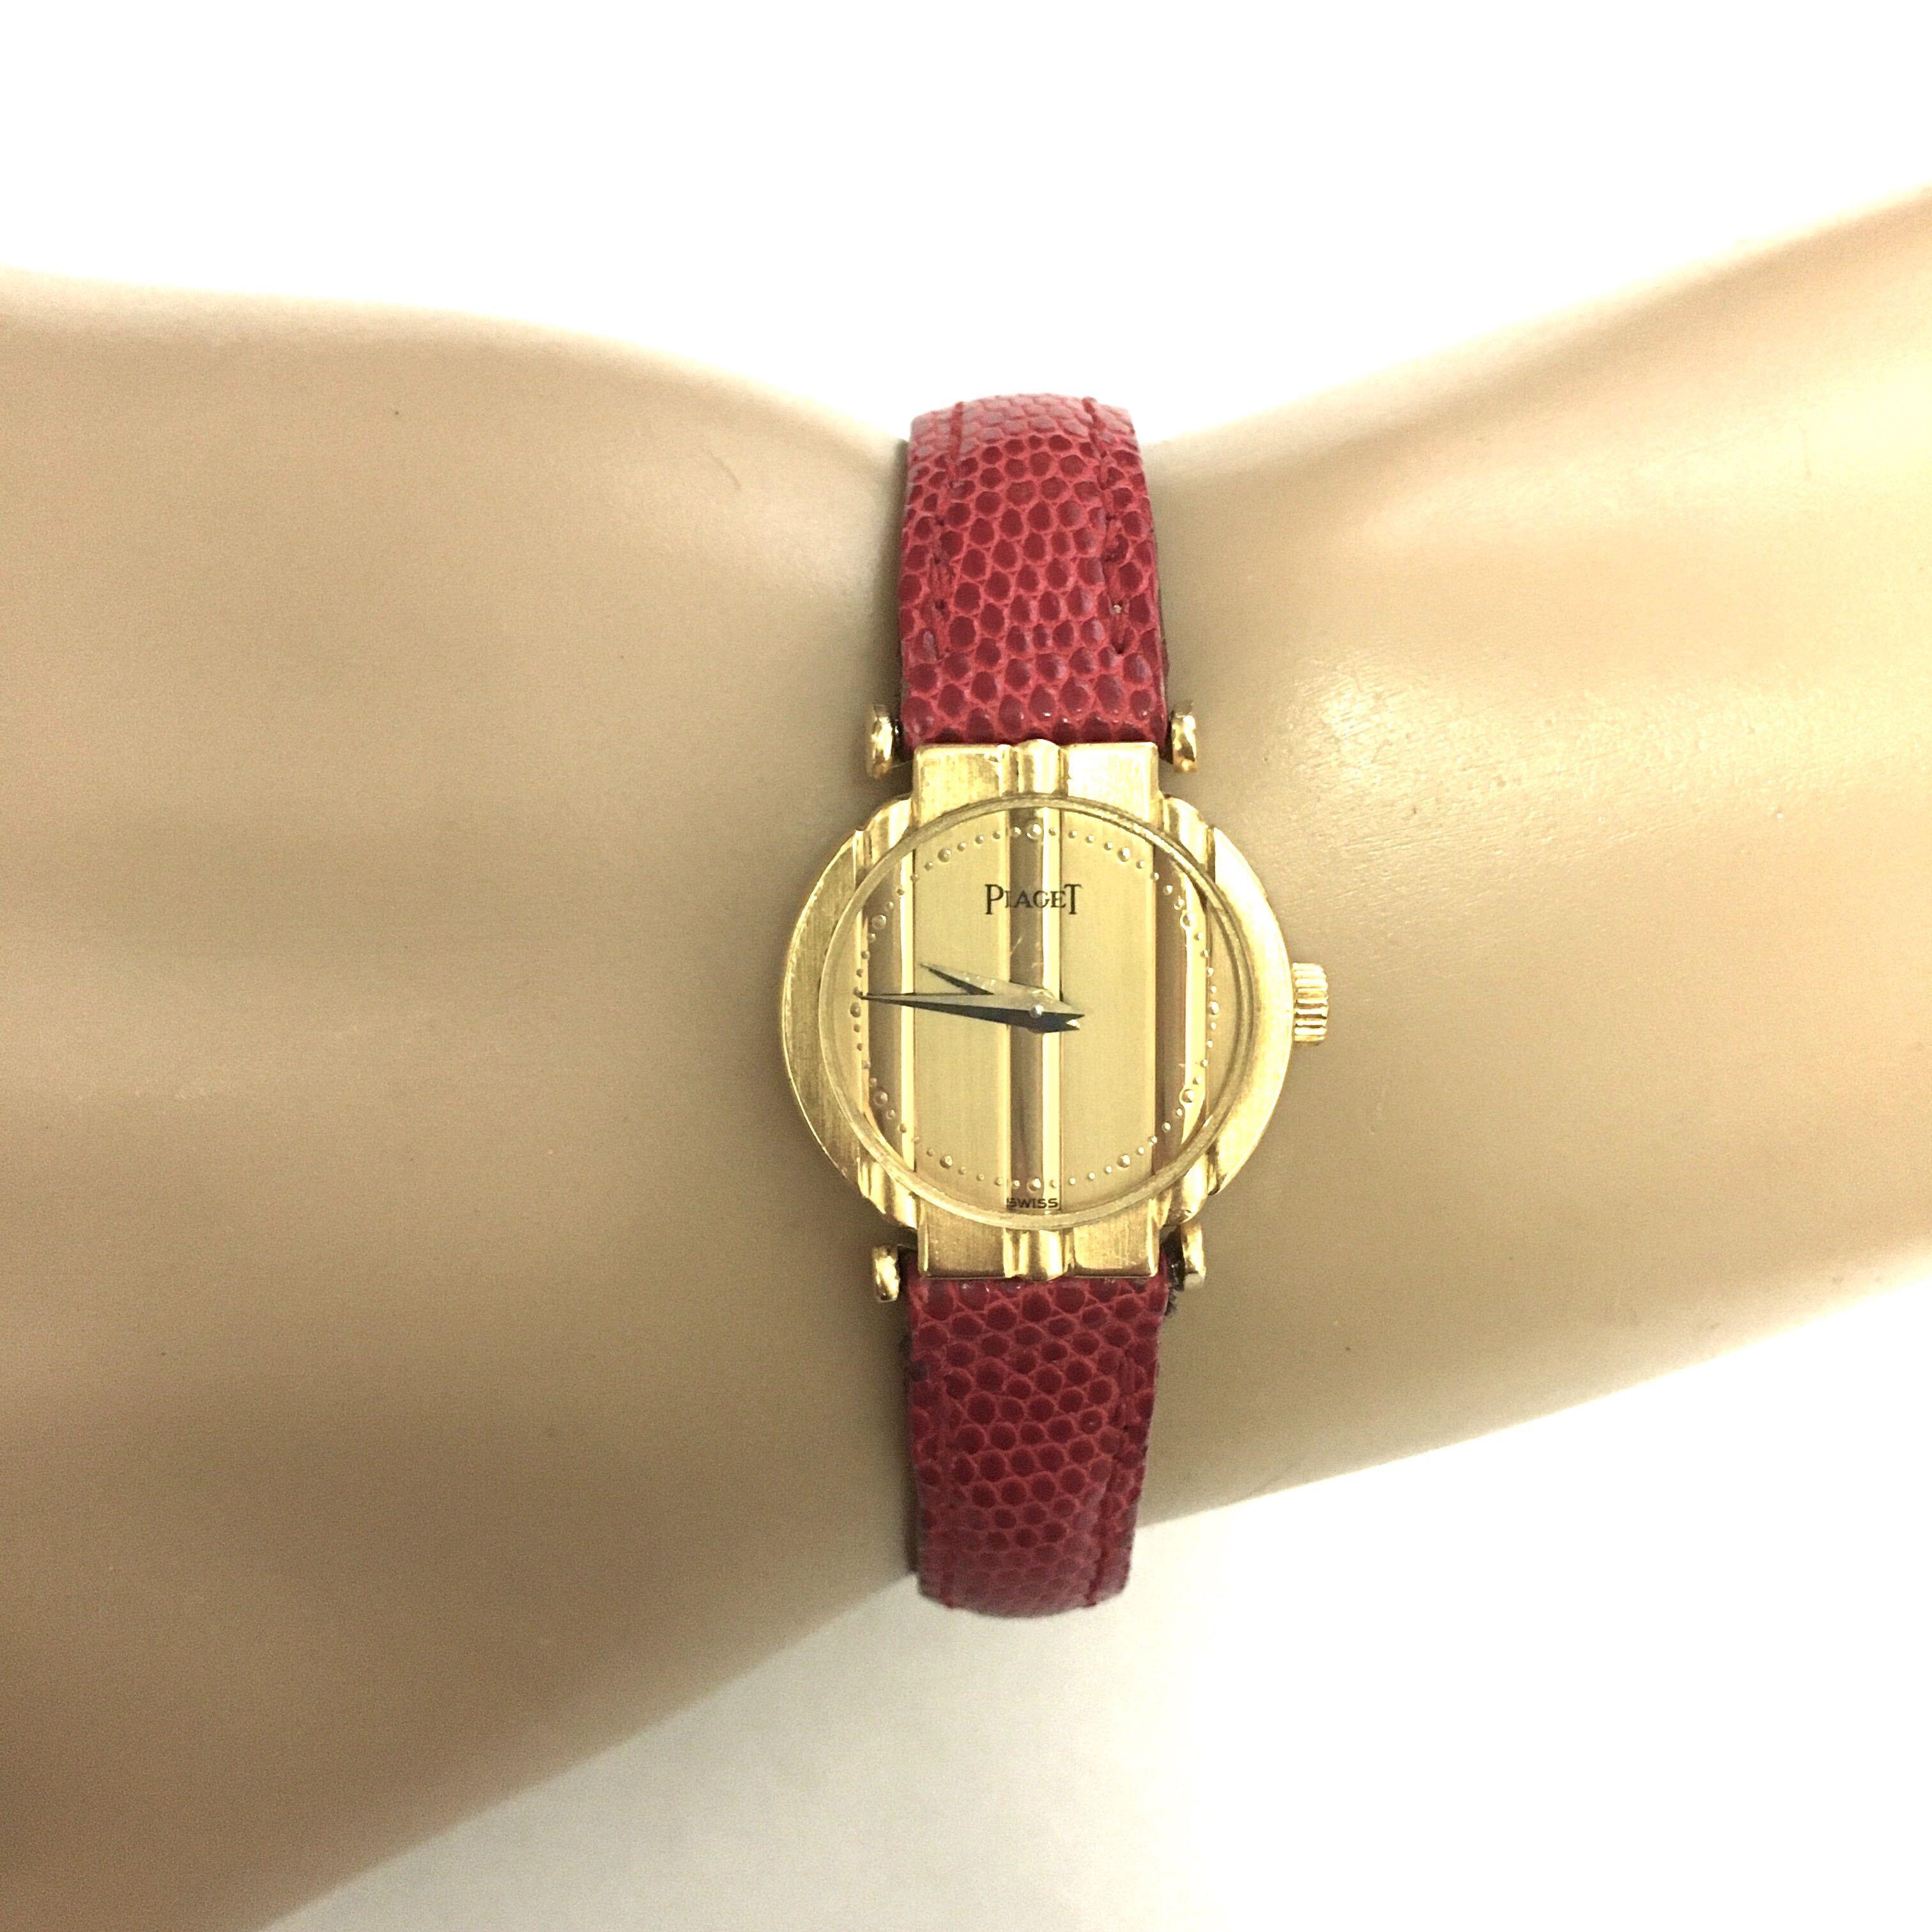 18 karat gold Polo watch. Piaget. 19mm. Of quartz movement. With red leather band.